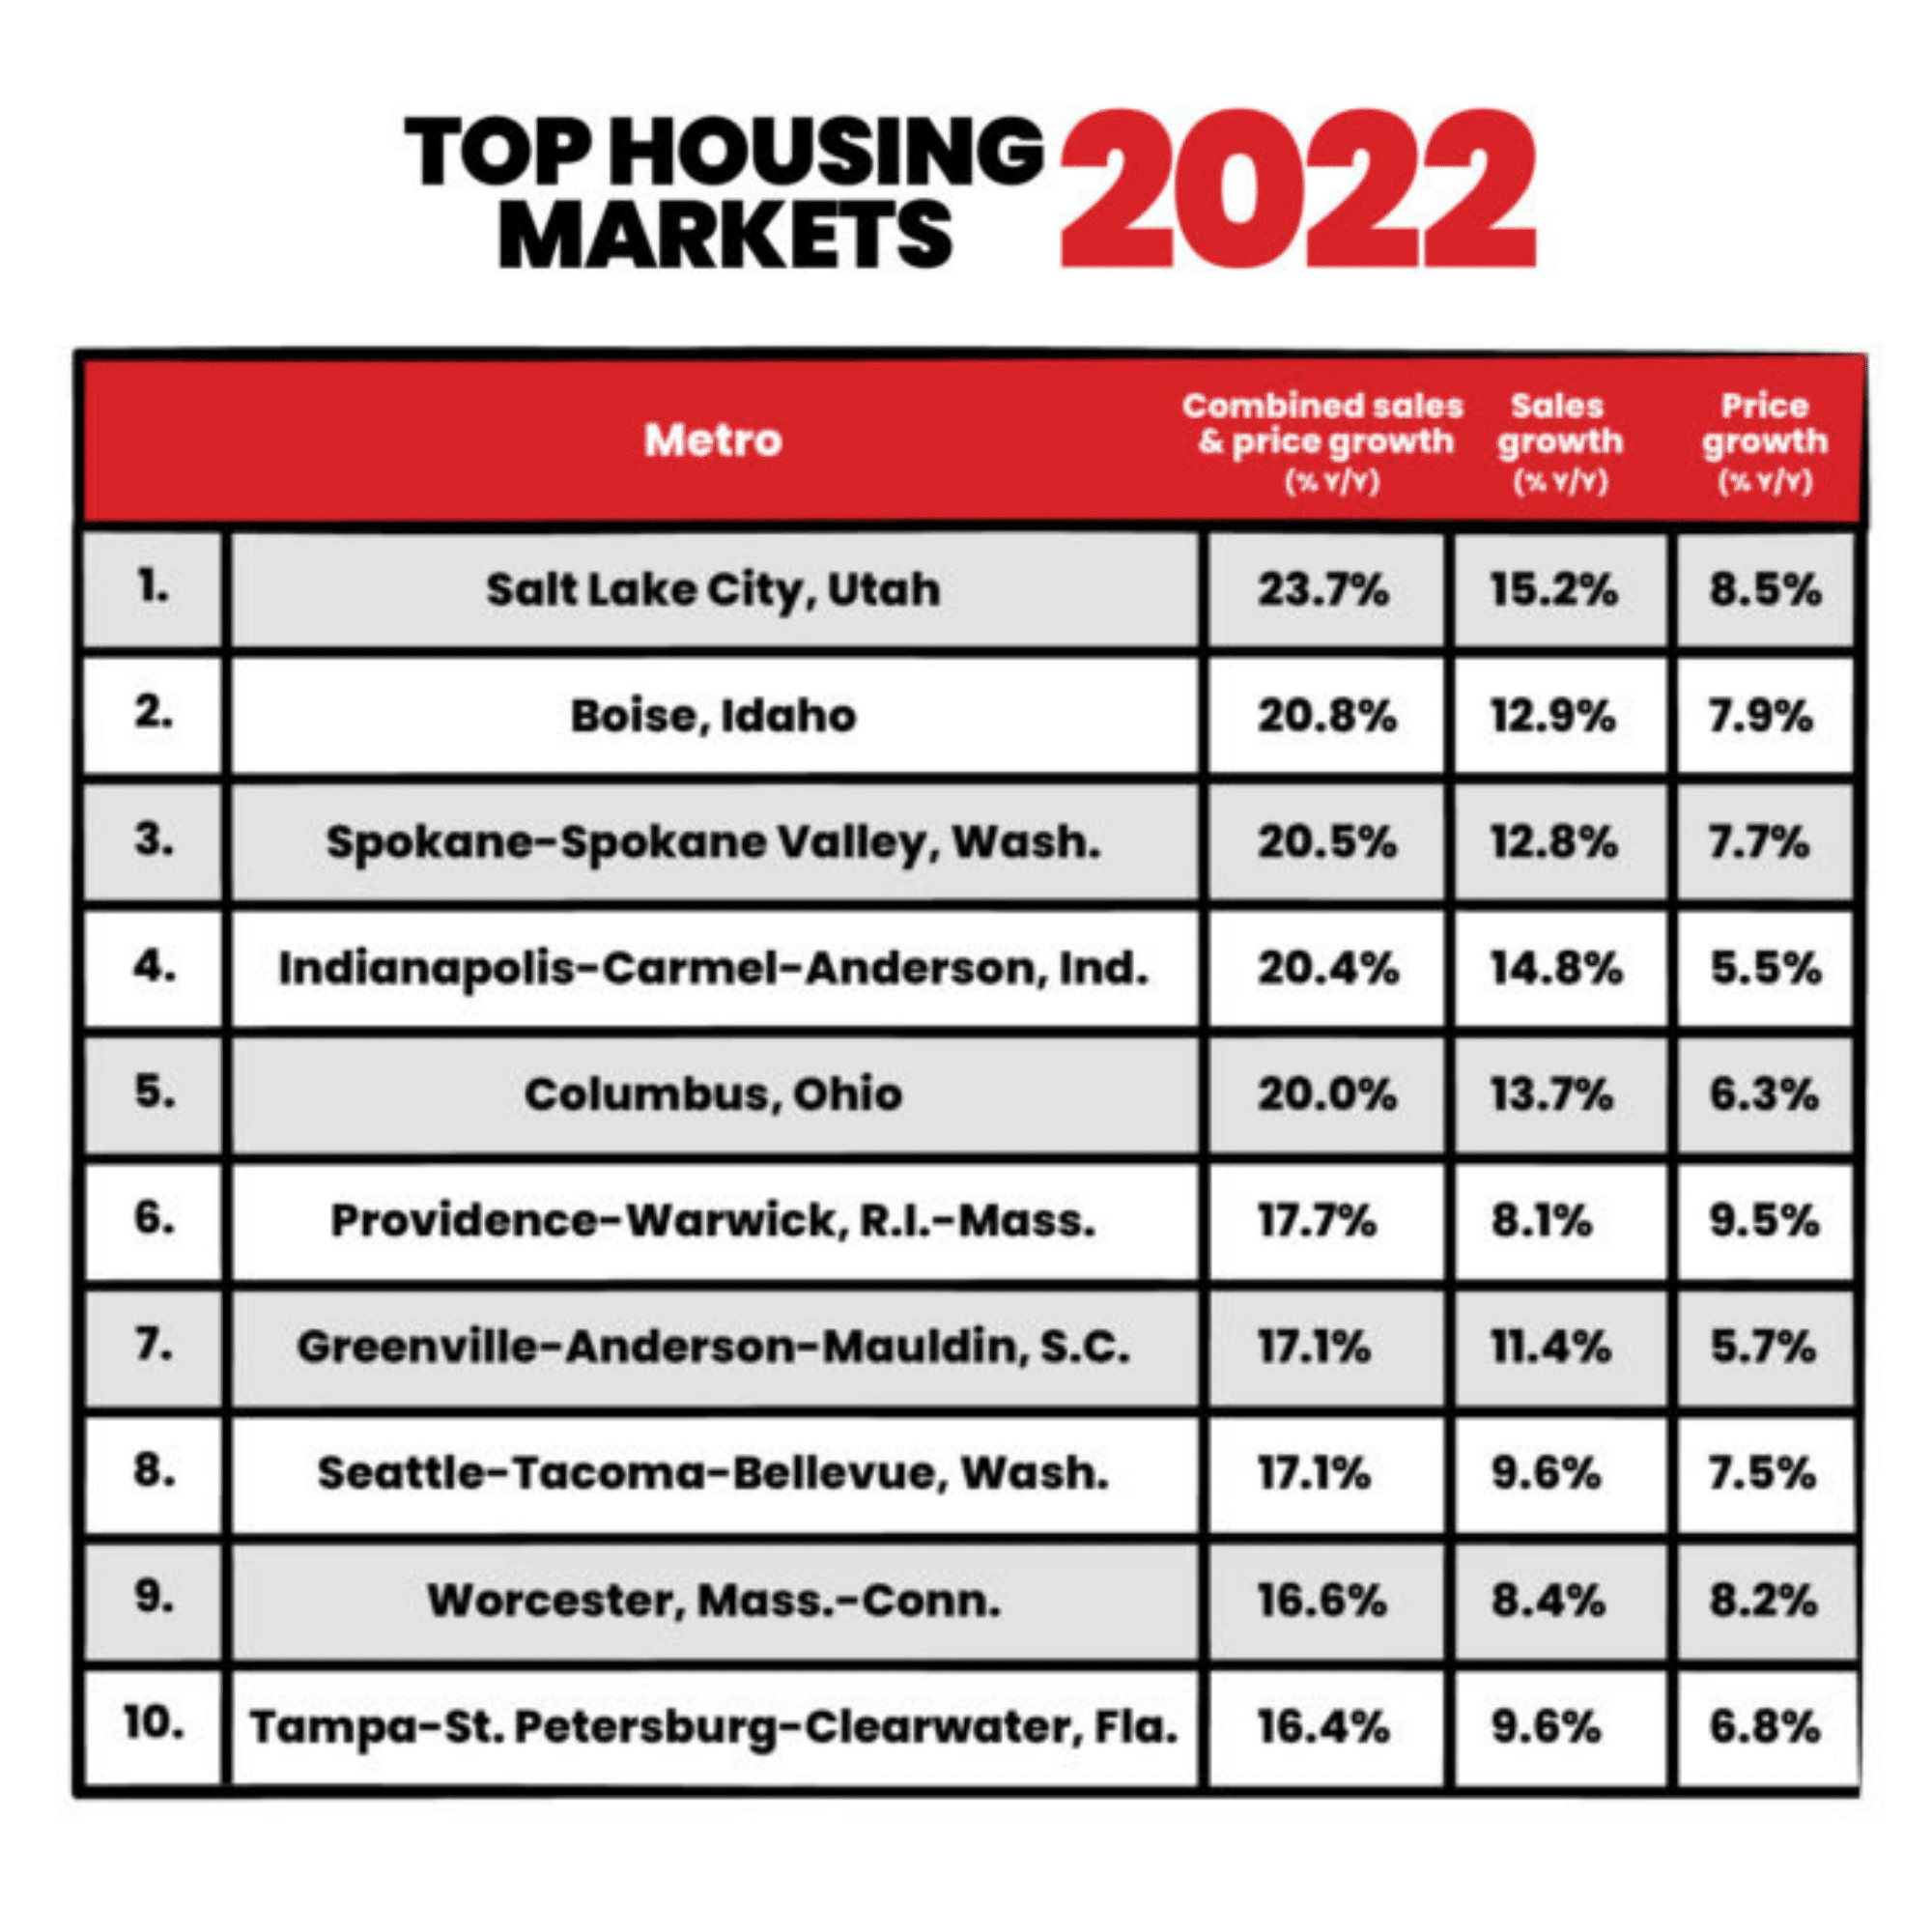 a list of the top 10 housing market projections for 2022